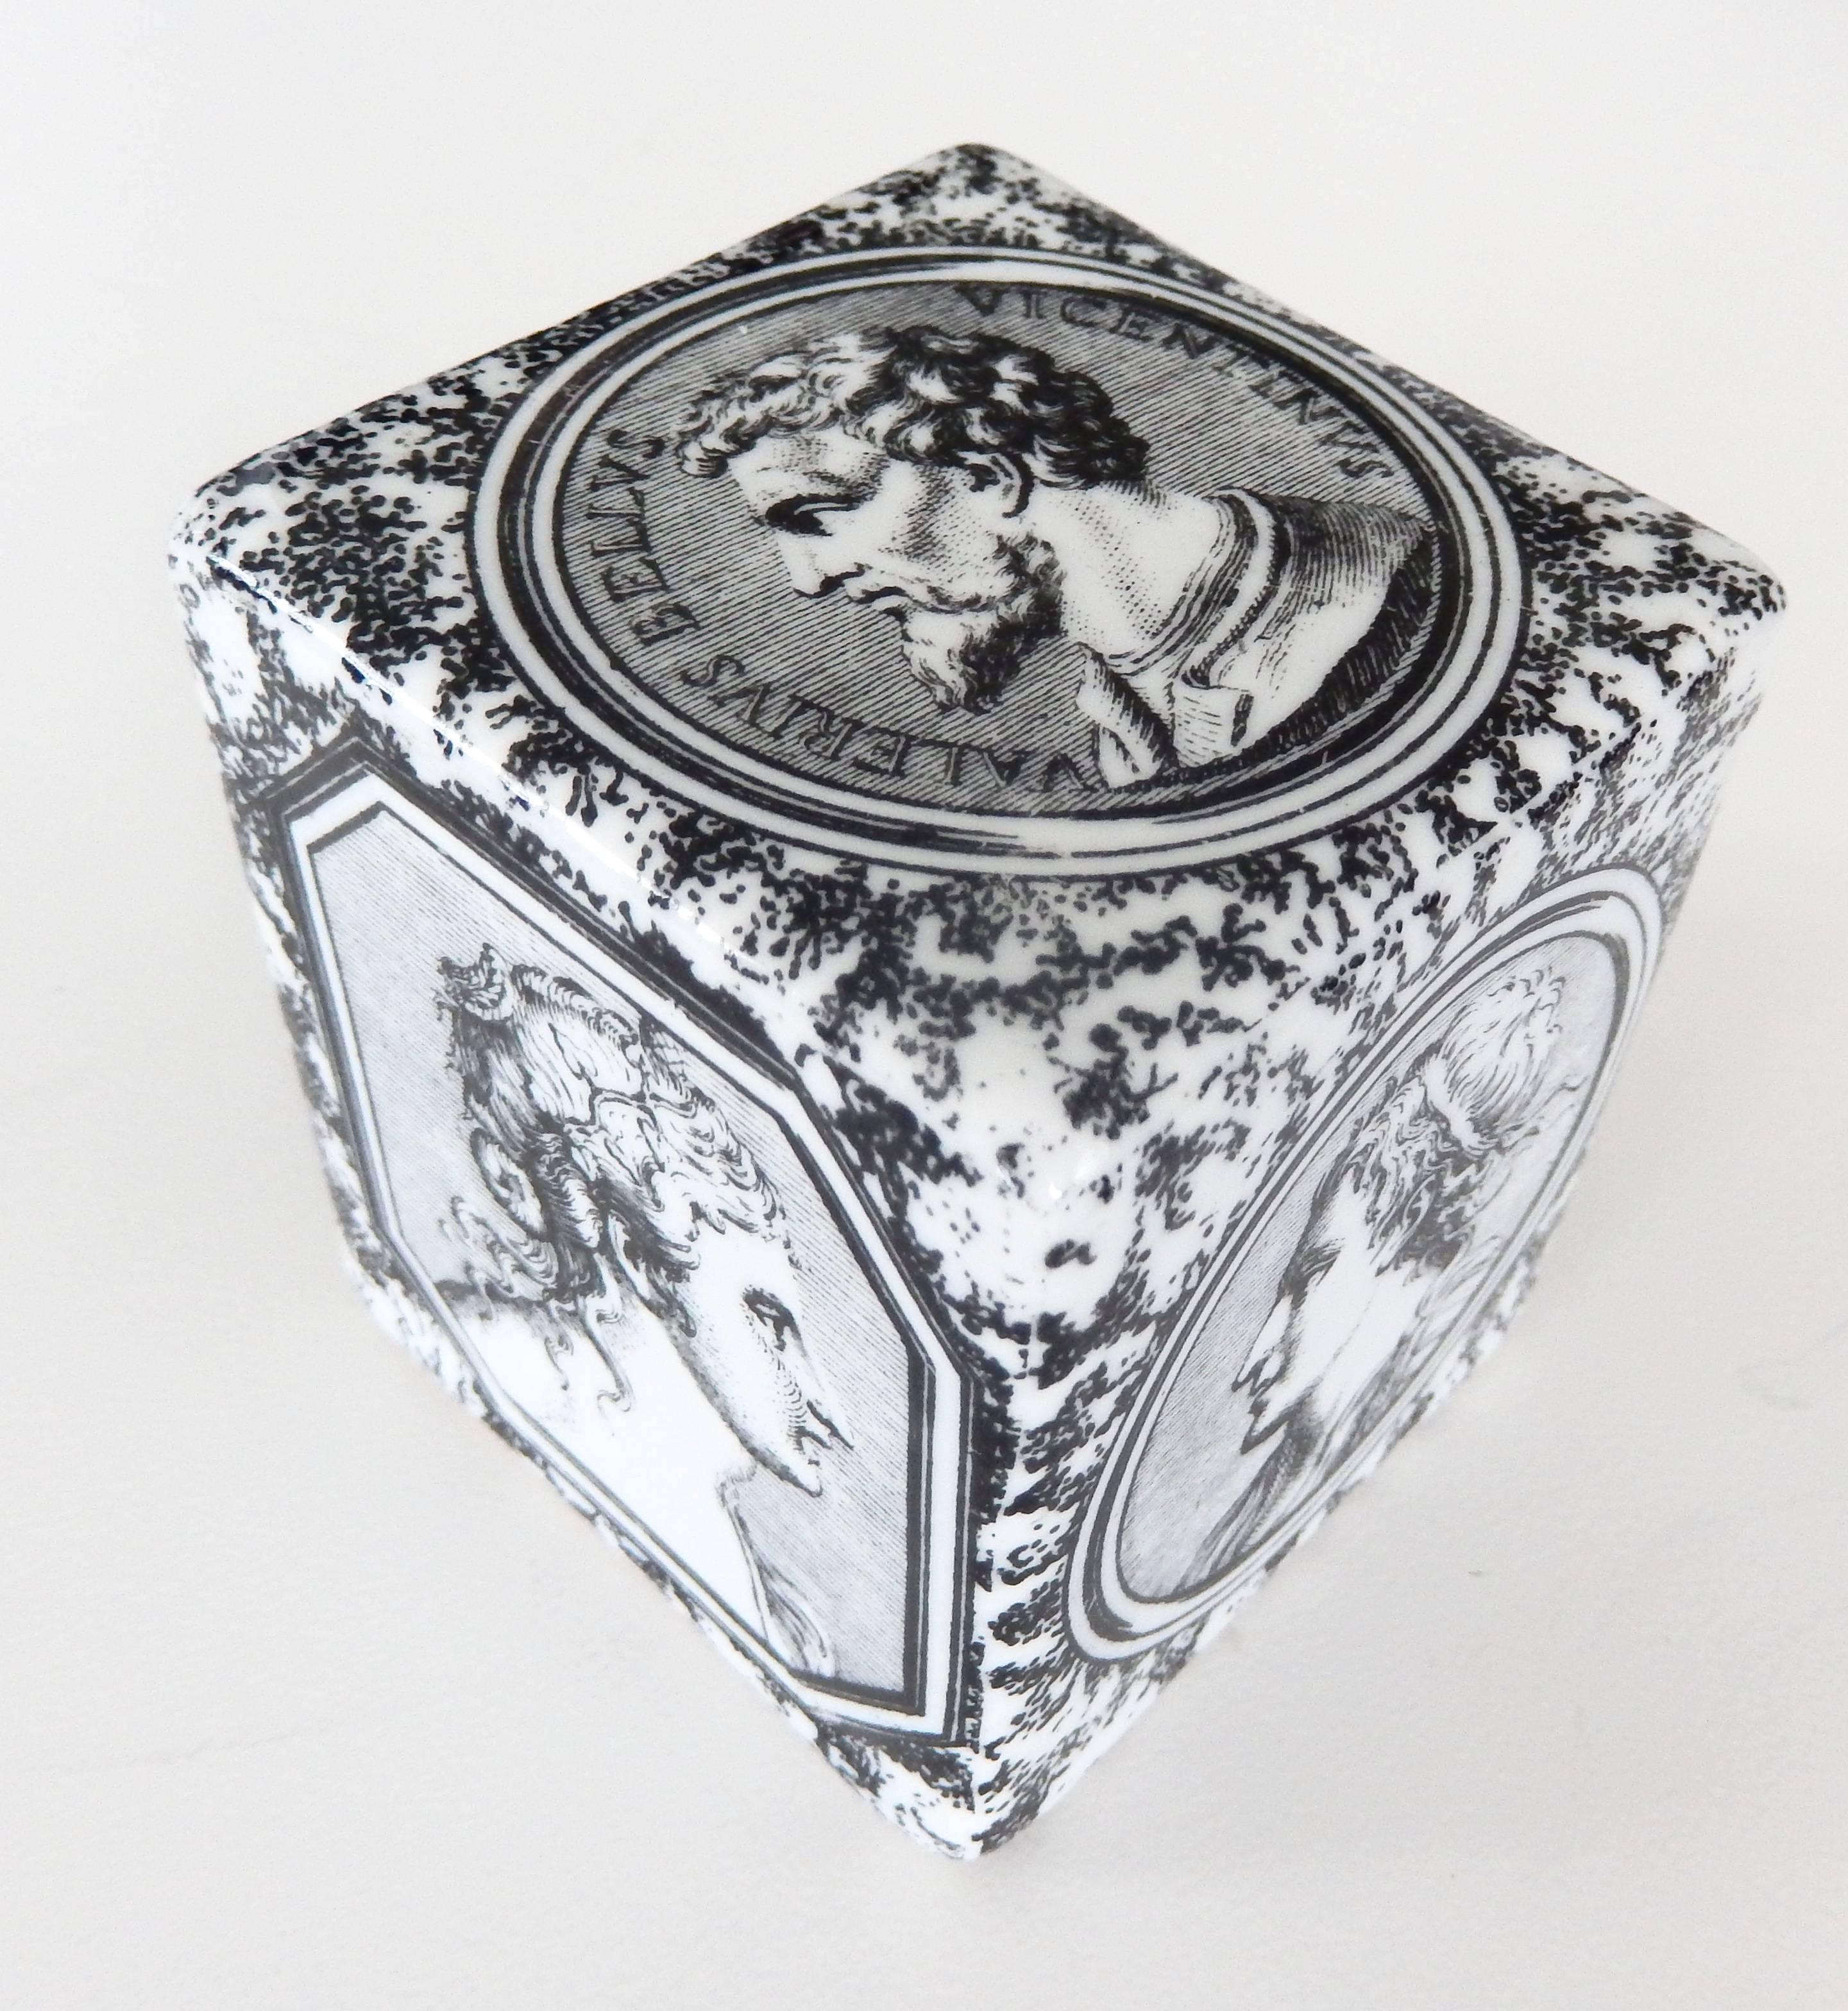 A ceramic cube paperweight by Piero Fornasetti with classical portraits on a faux marble ground. A great example of Fornasetti's innovative graphic design and recurrent neoclassical motifs. Embossed signature on base.